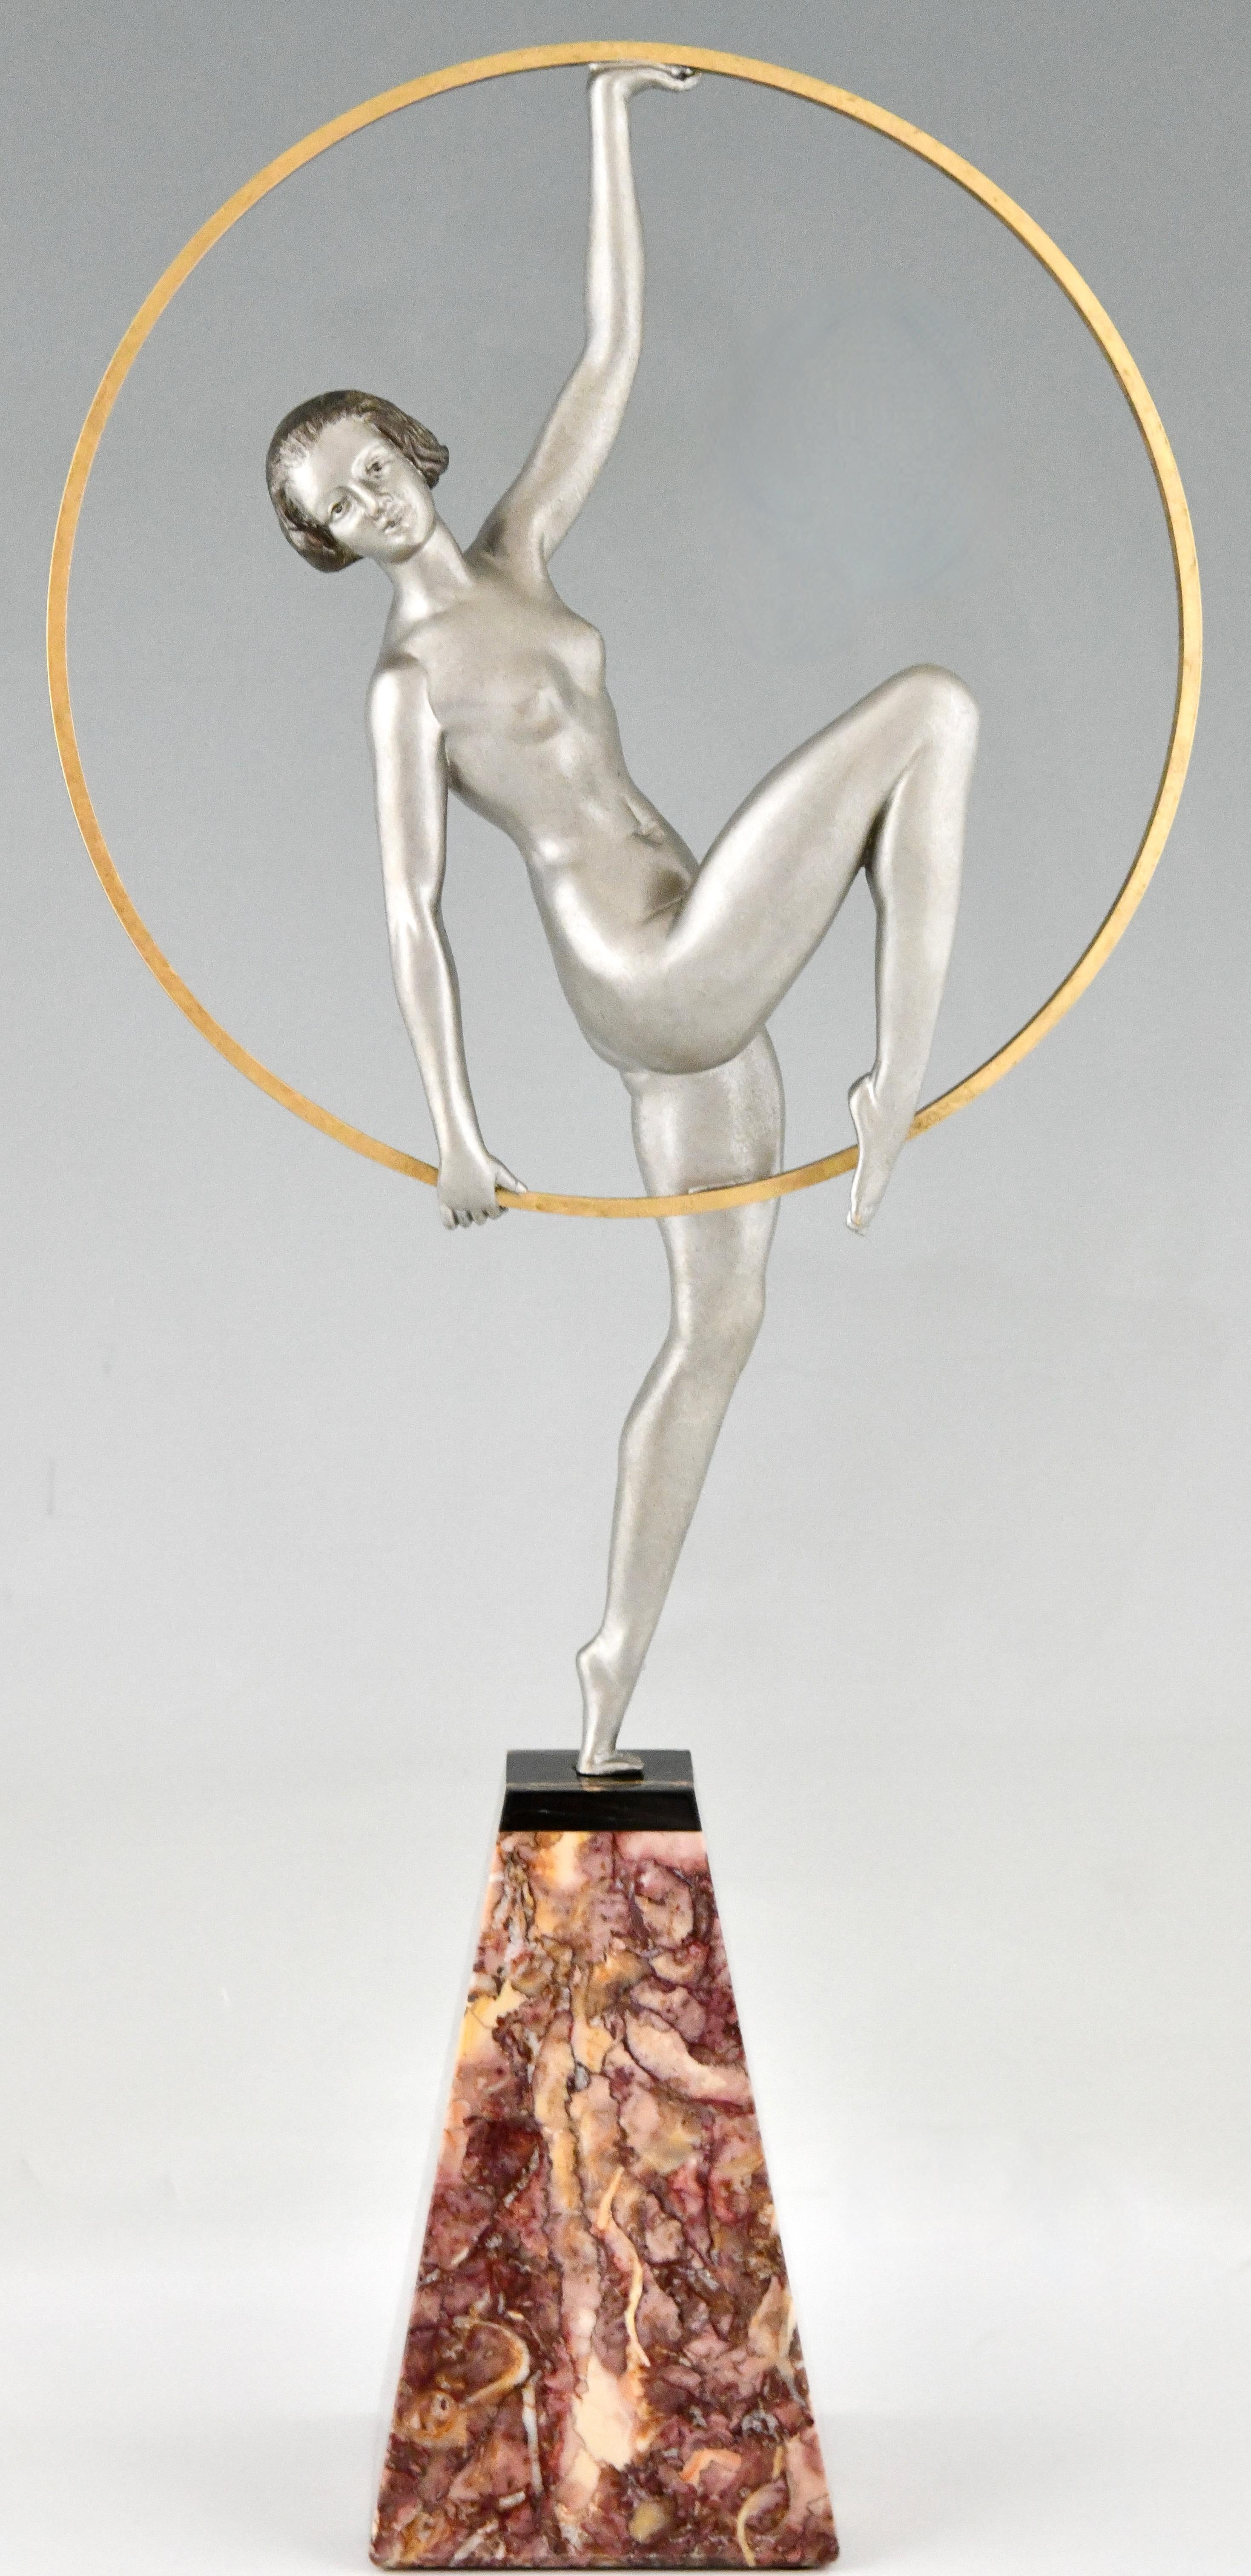 Art Deco sculpture hoop dancer by Limousin.
Patinated Art Metal. 
On Portor and pink marble base. 
France 1930. 